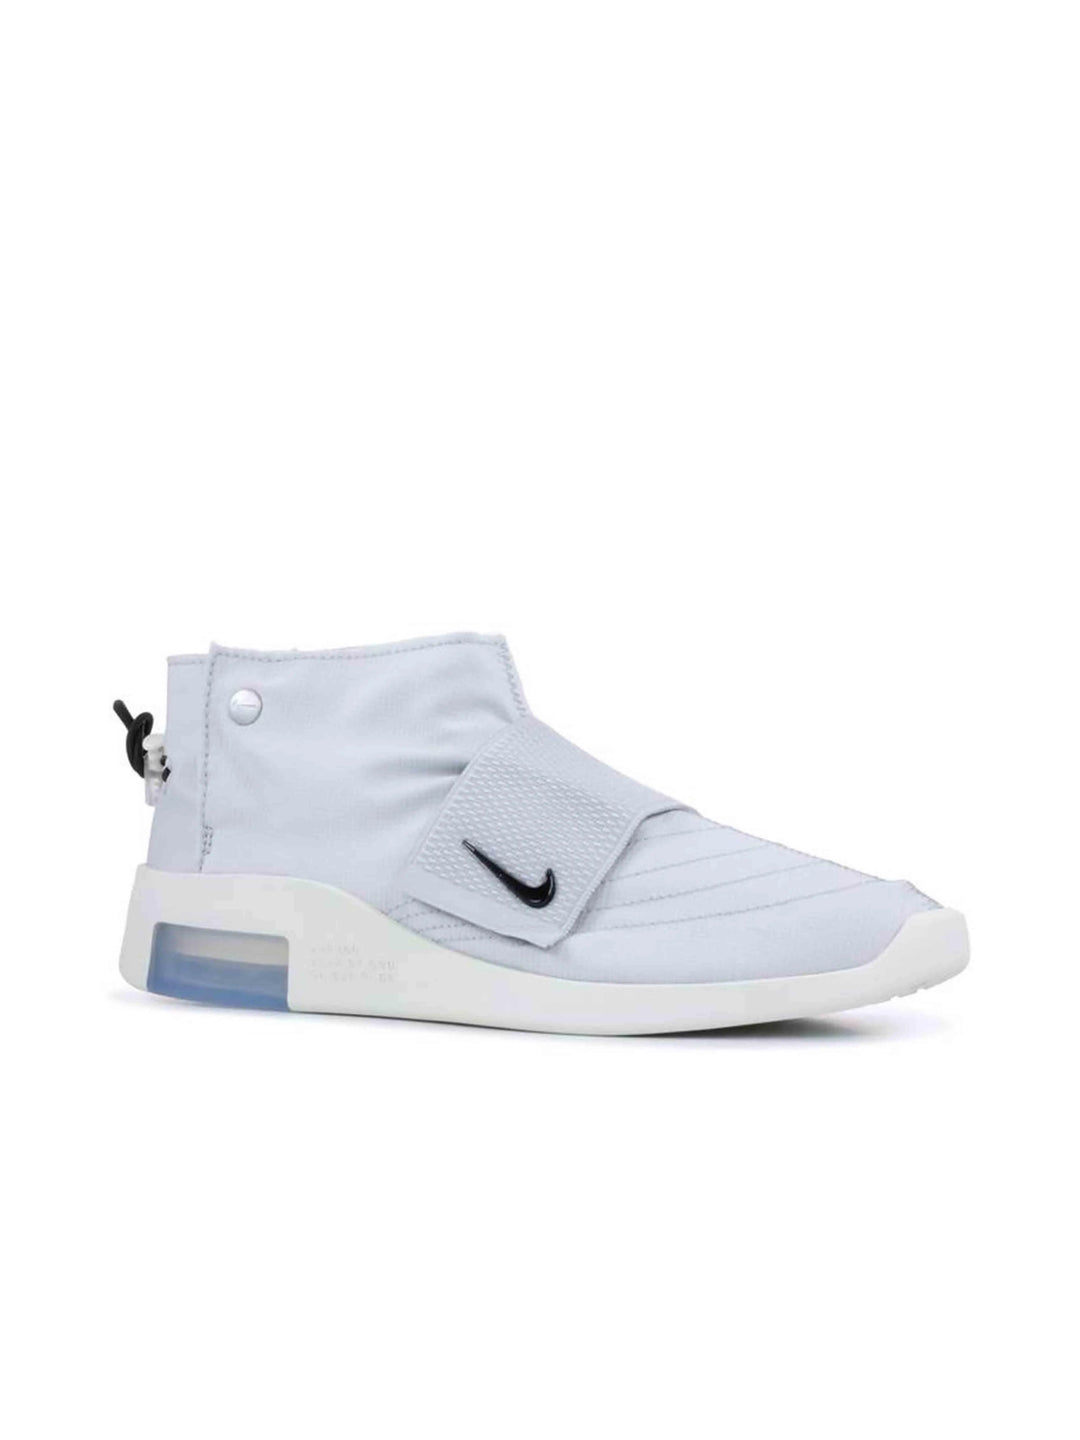 Nike Air Fear Of God Moccasin Pure Platinum Nike